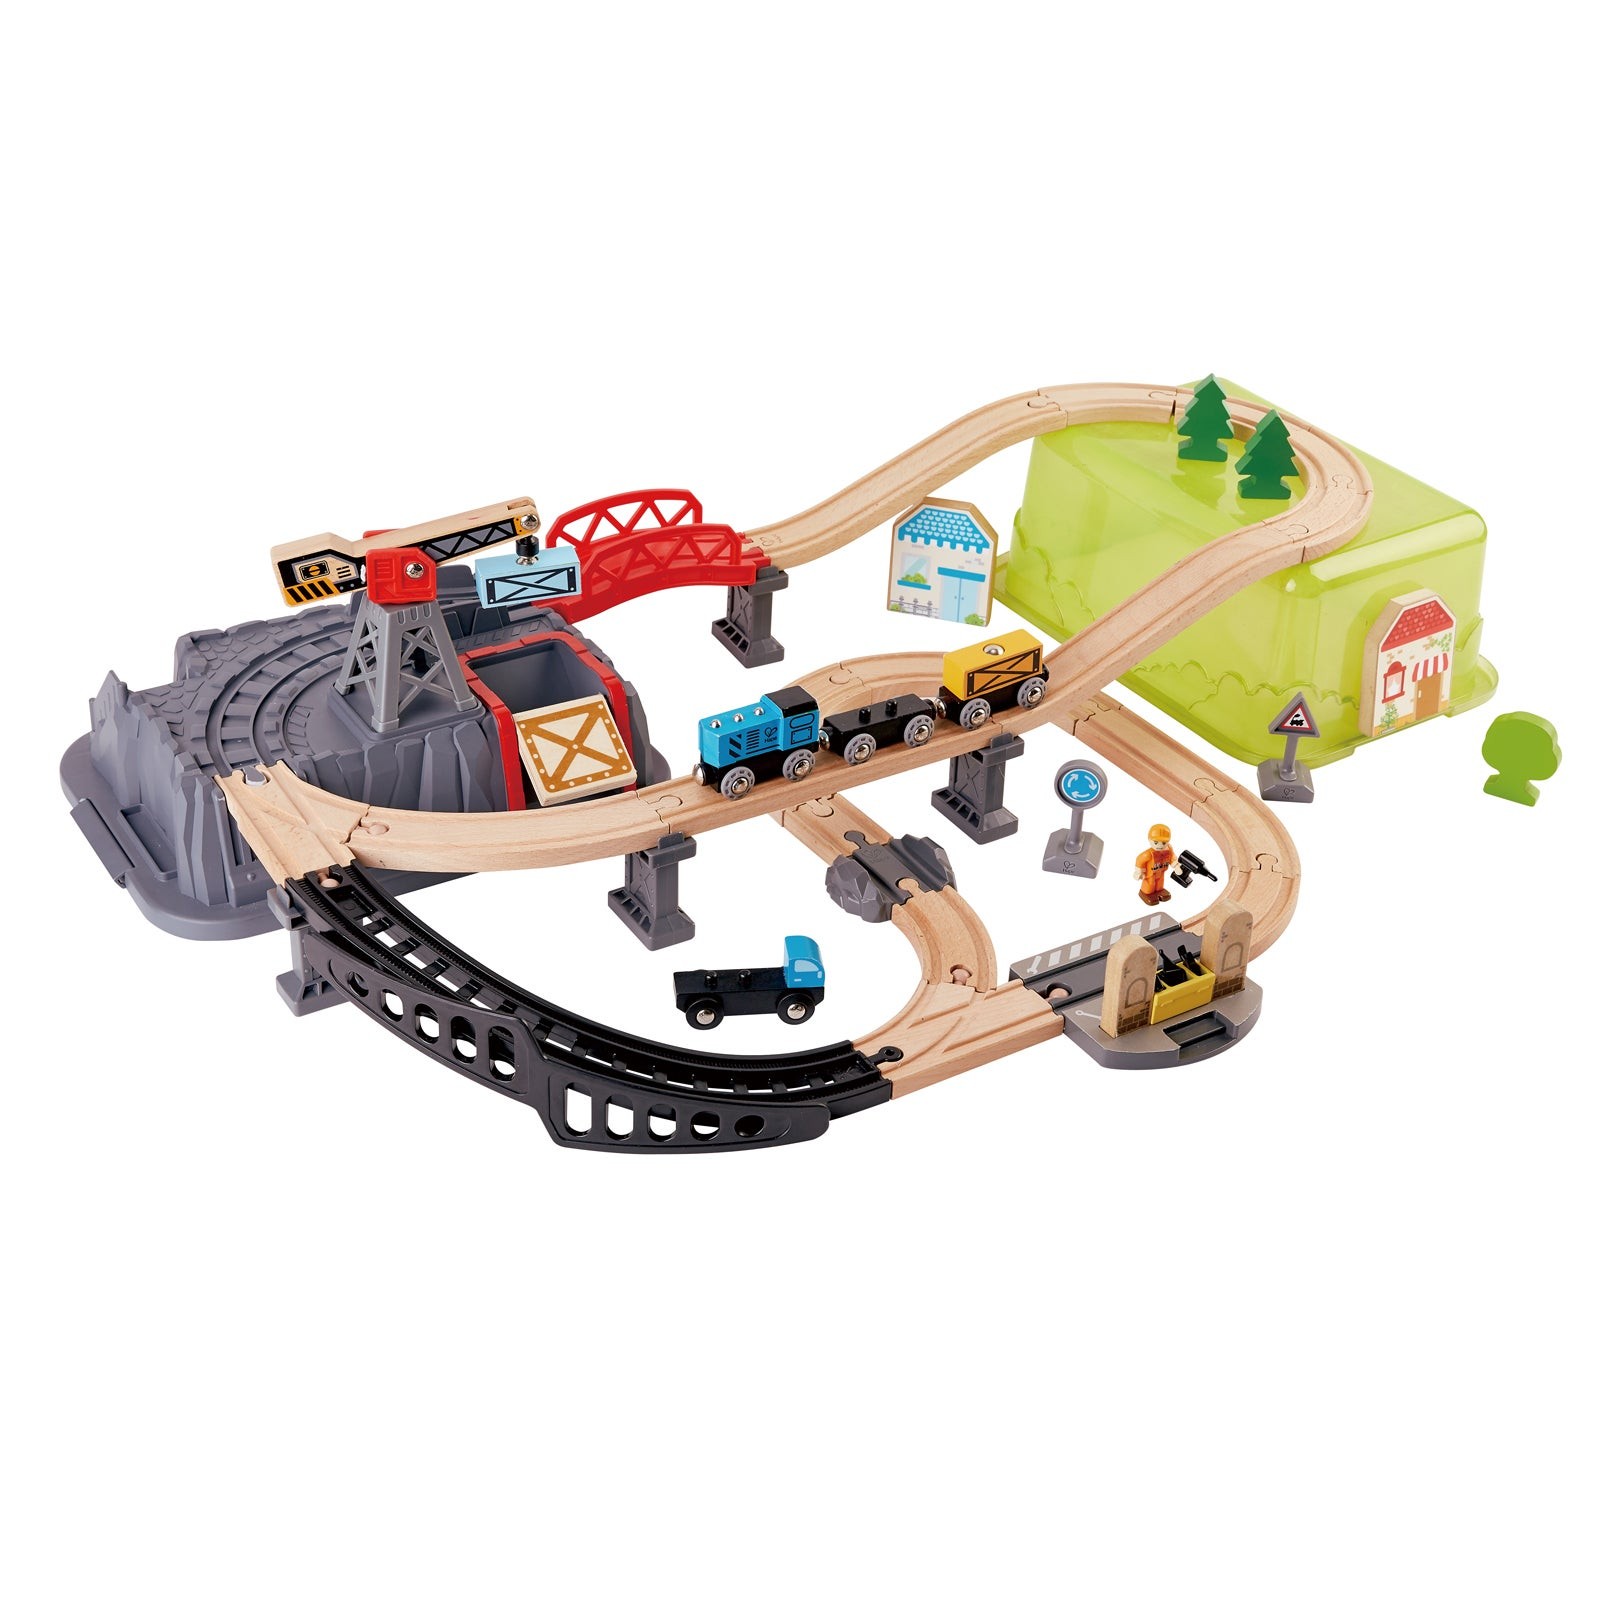 Railway Bucket Construction Builder Set Ages 3+ Years